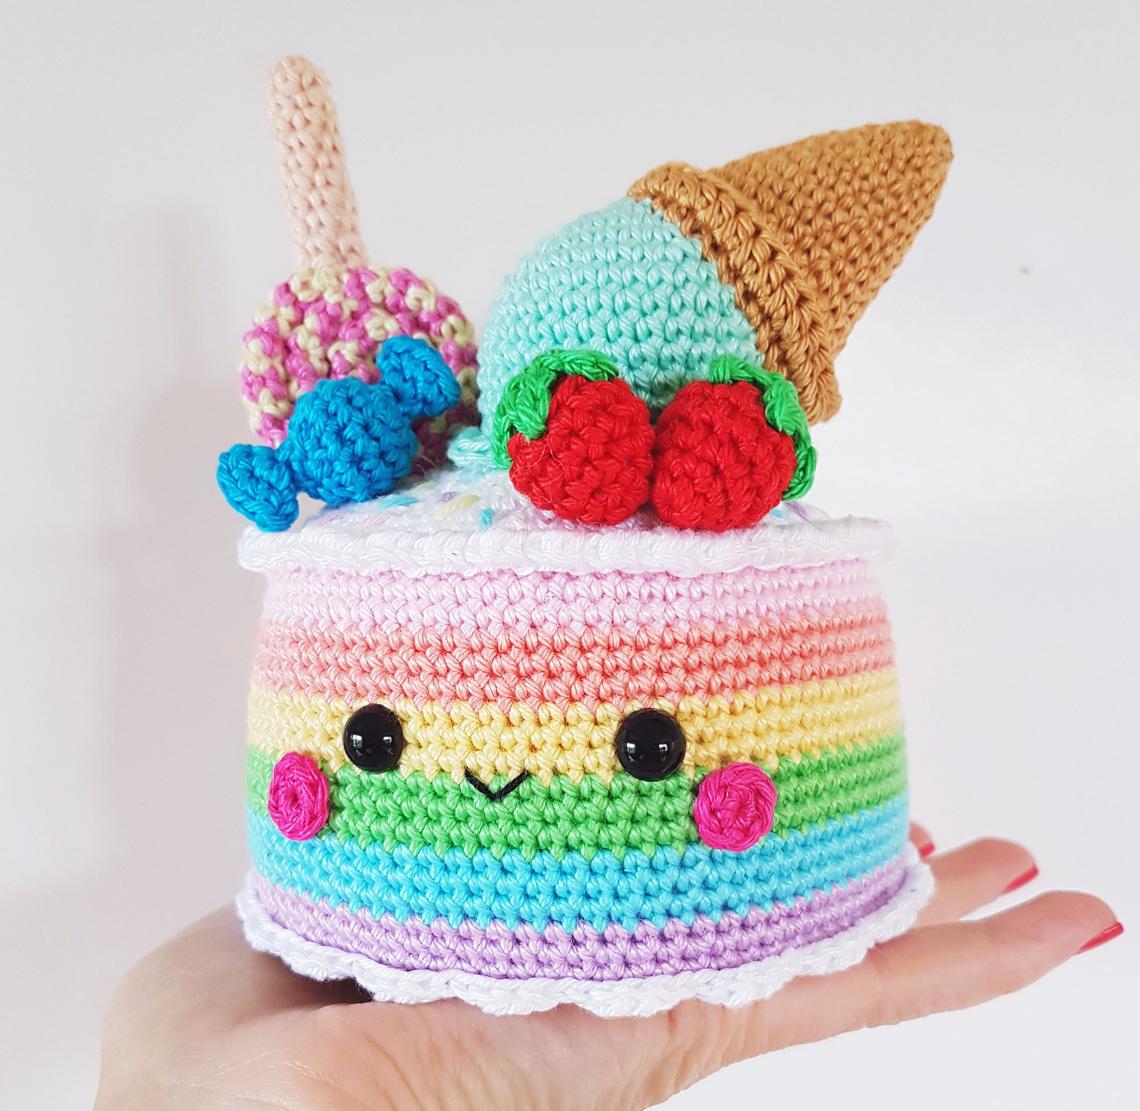 Yarn Cake with a Crochet Candle - Repeat Crafter Me